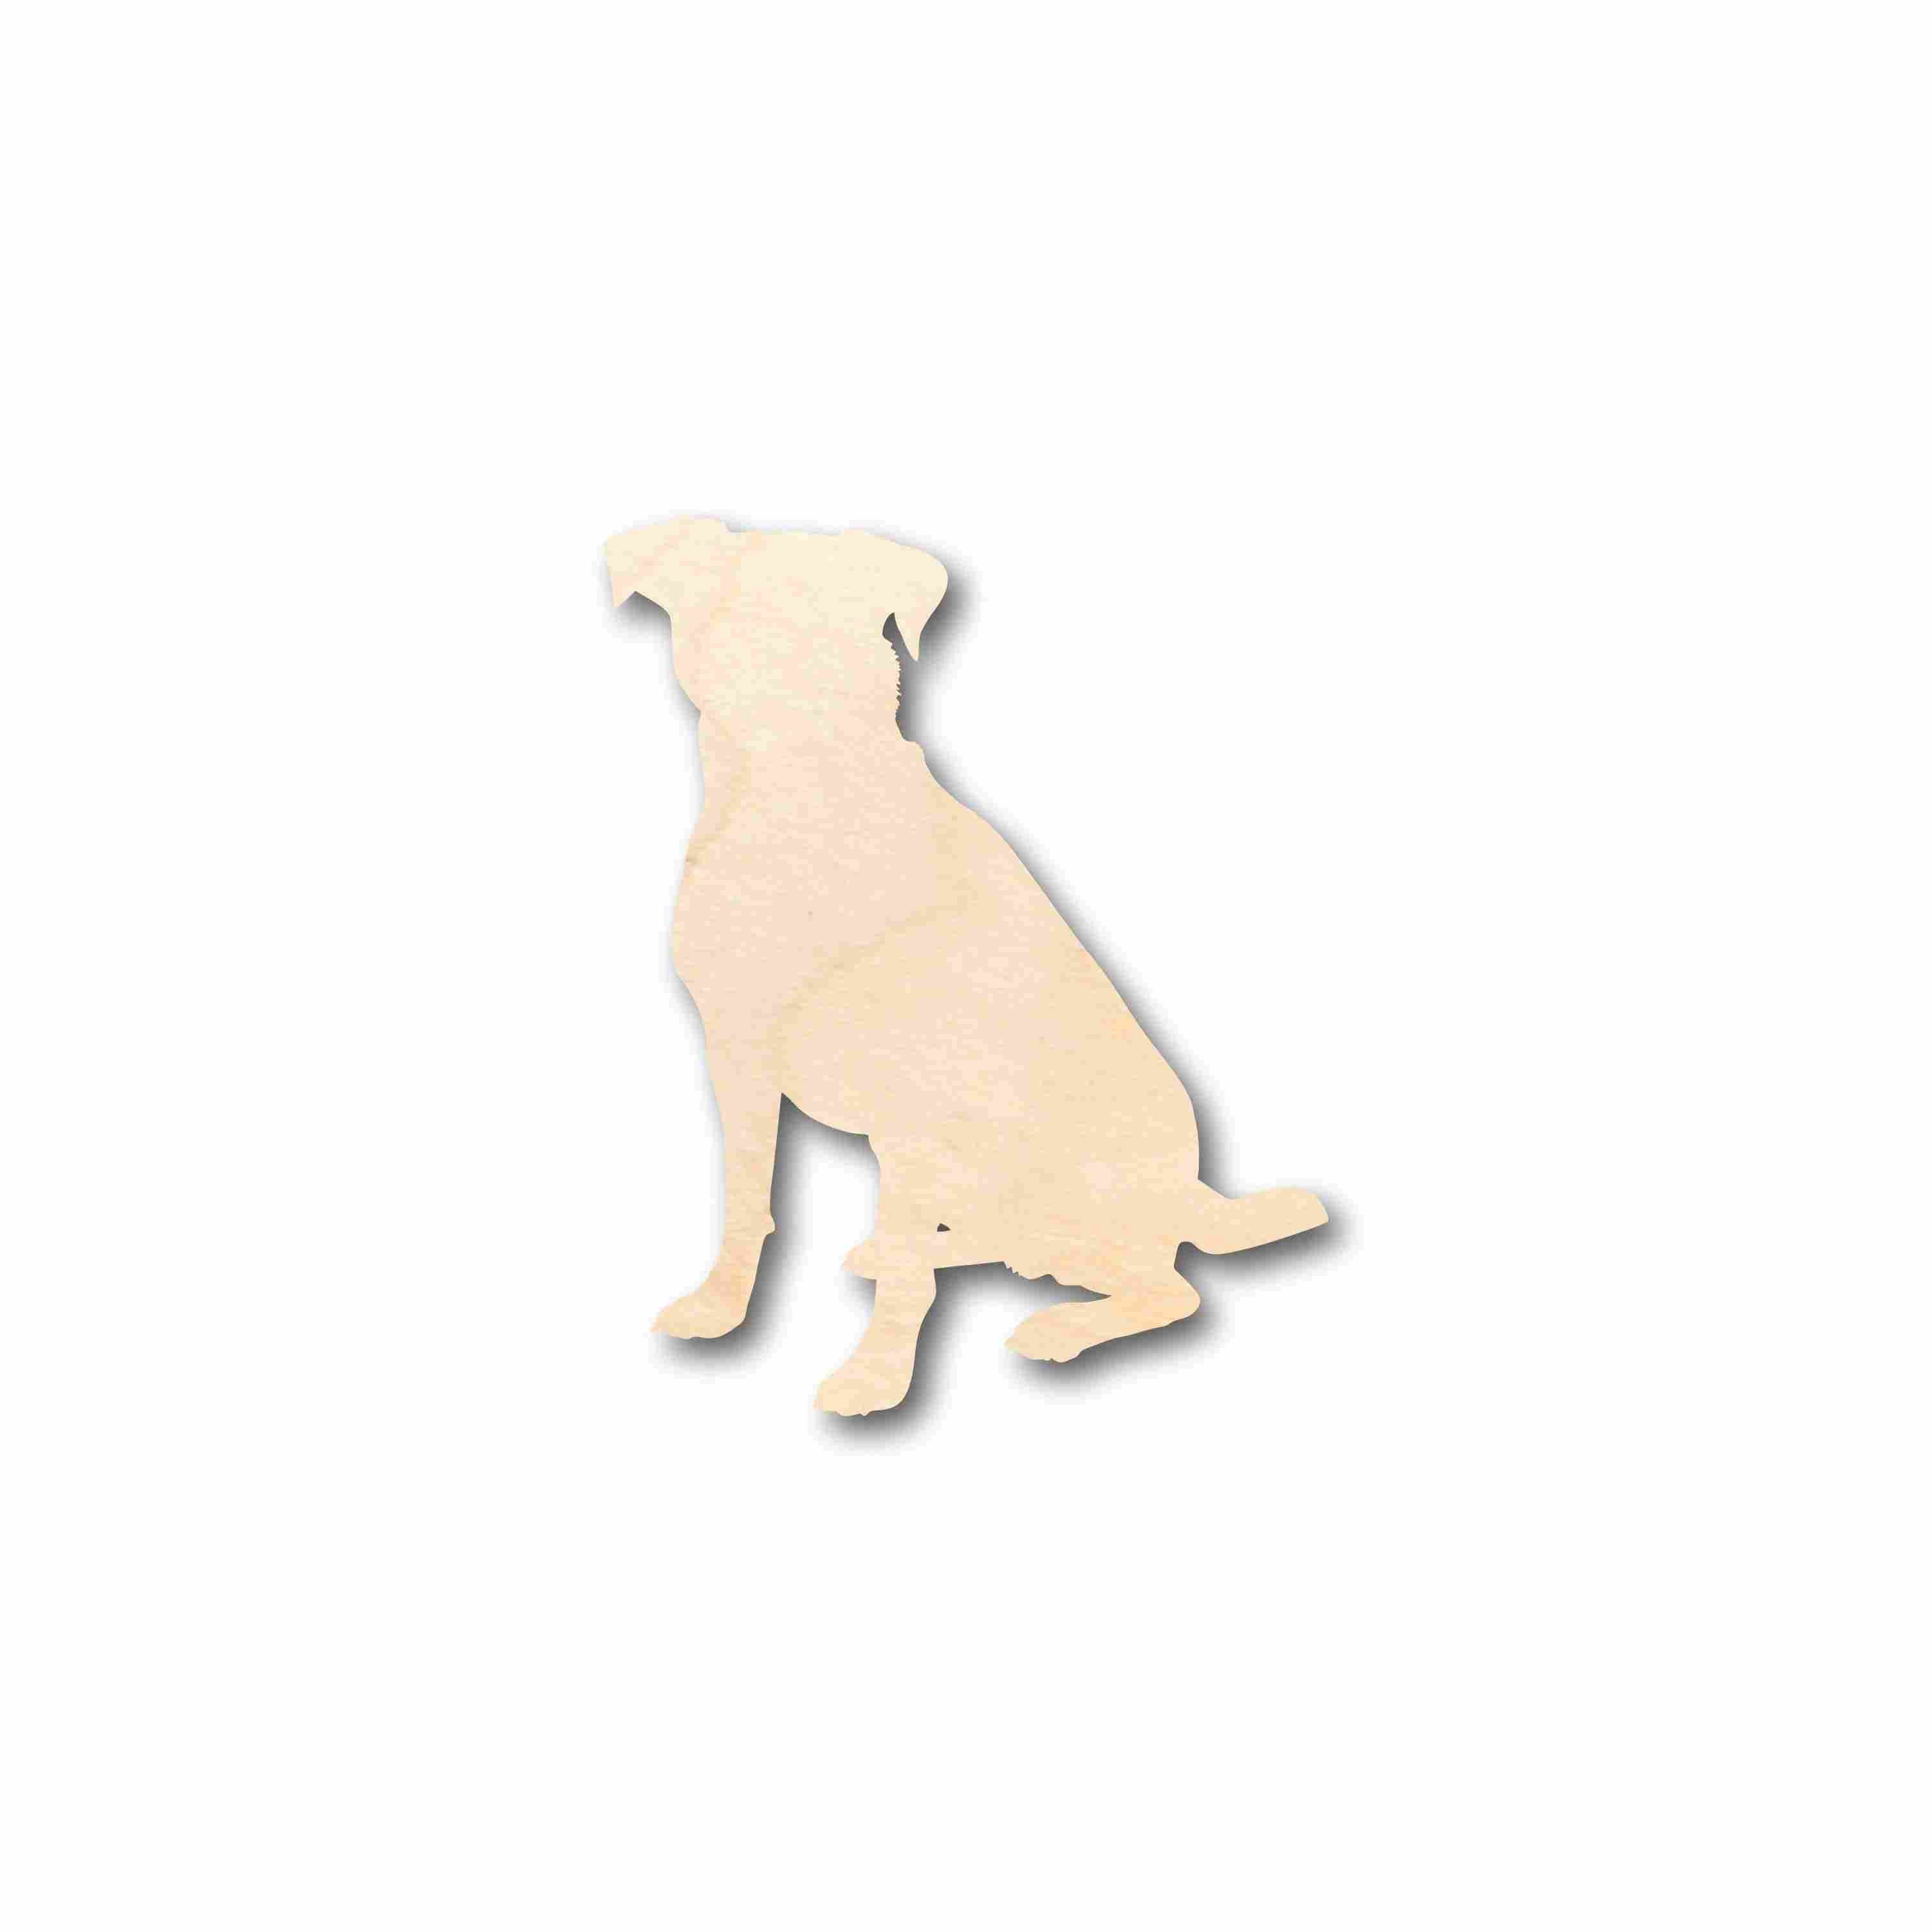 Unfinished Wood Dog Silhouette - Craft- up to 24